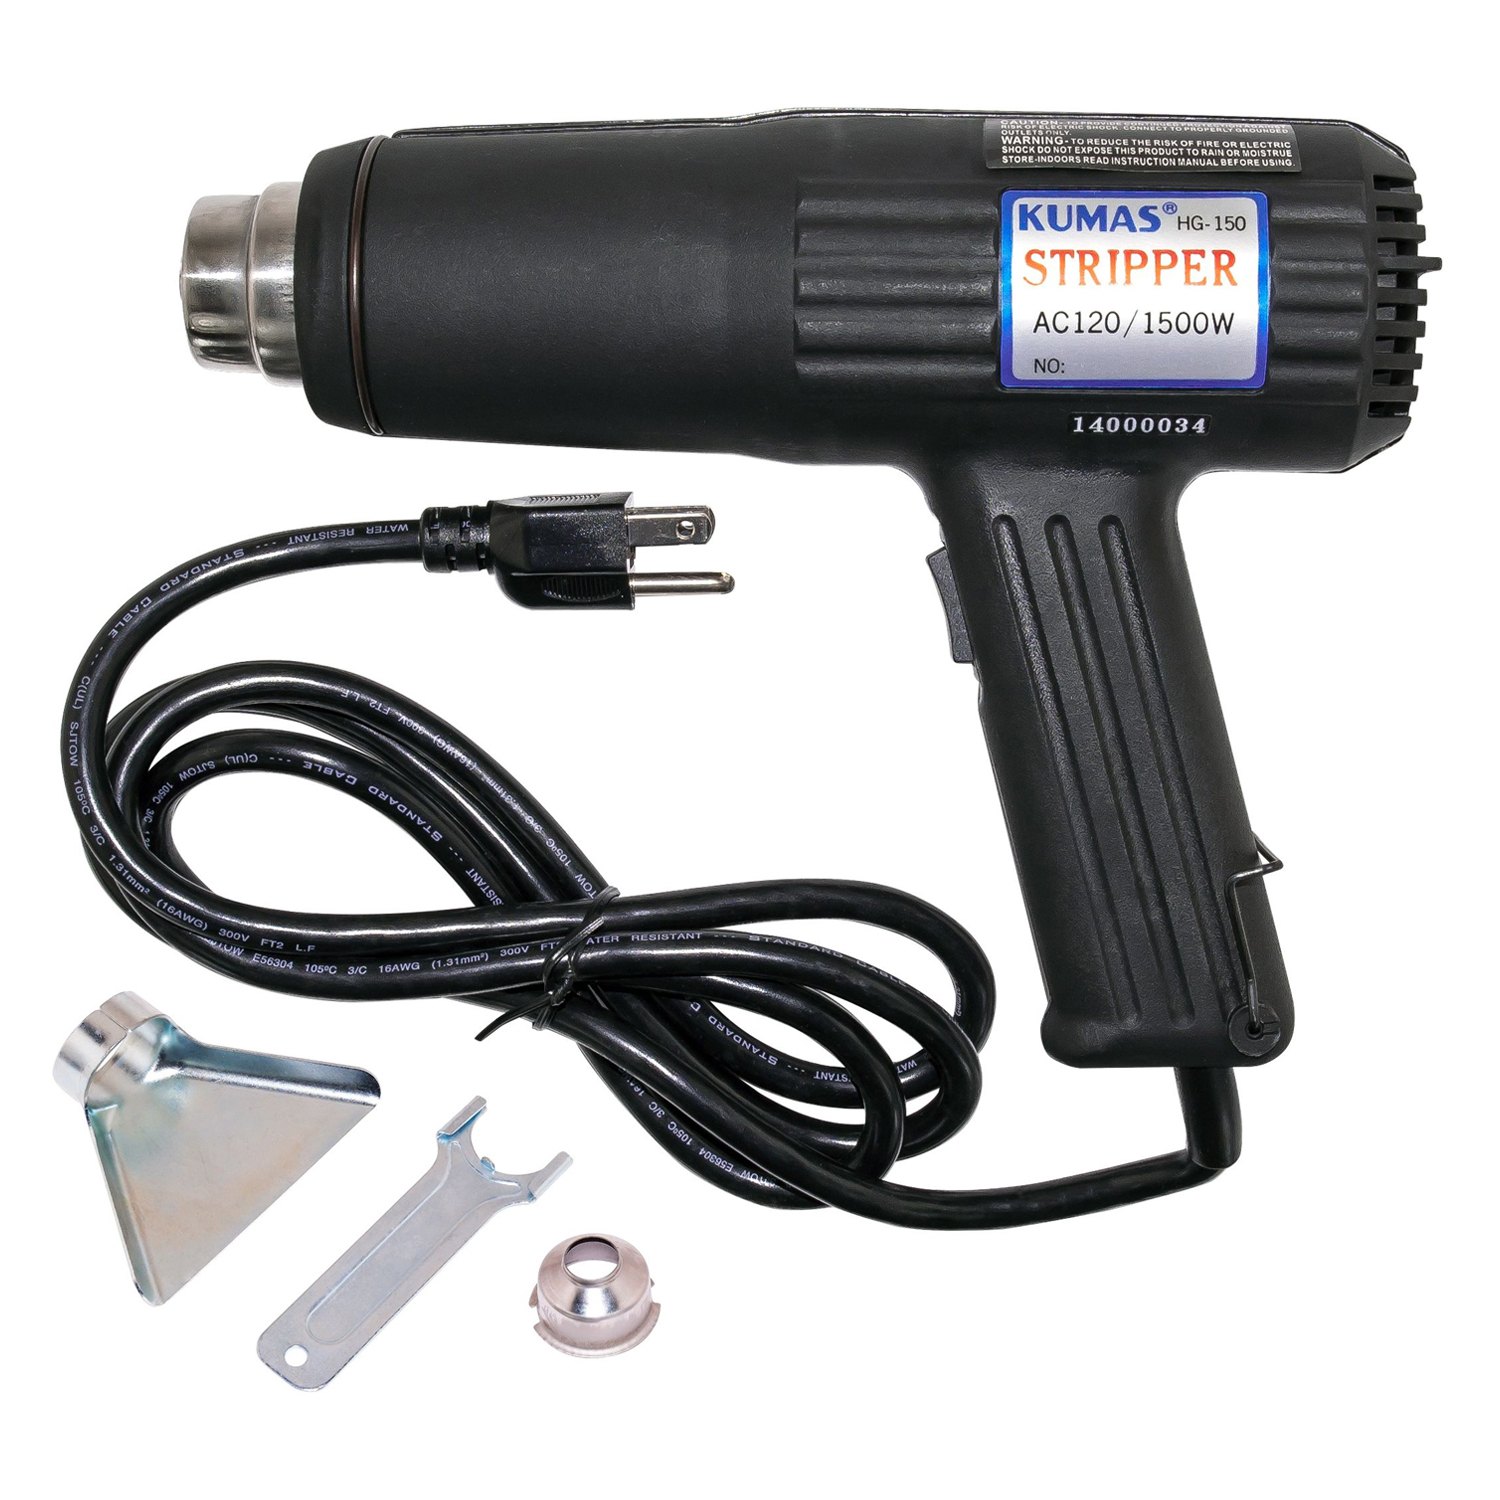 Heat Gun and InstaMorph : 9 Steps - Instructables